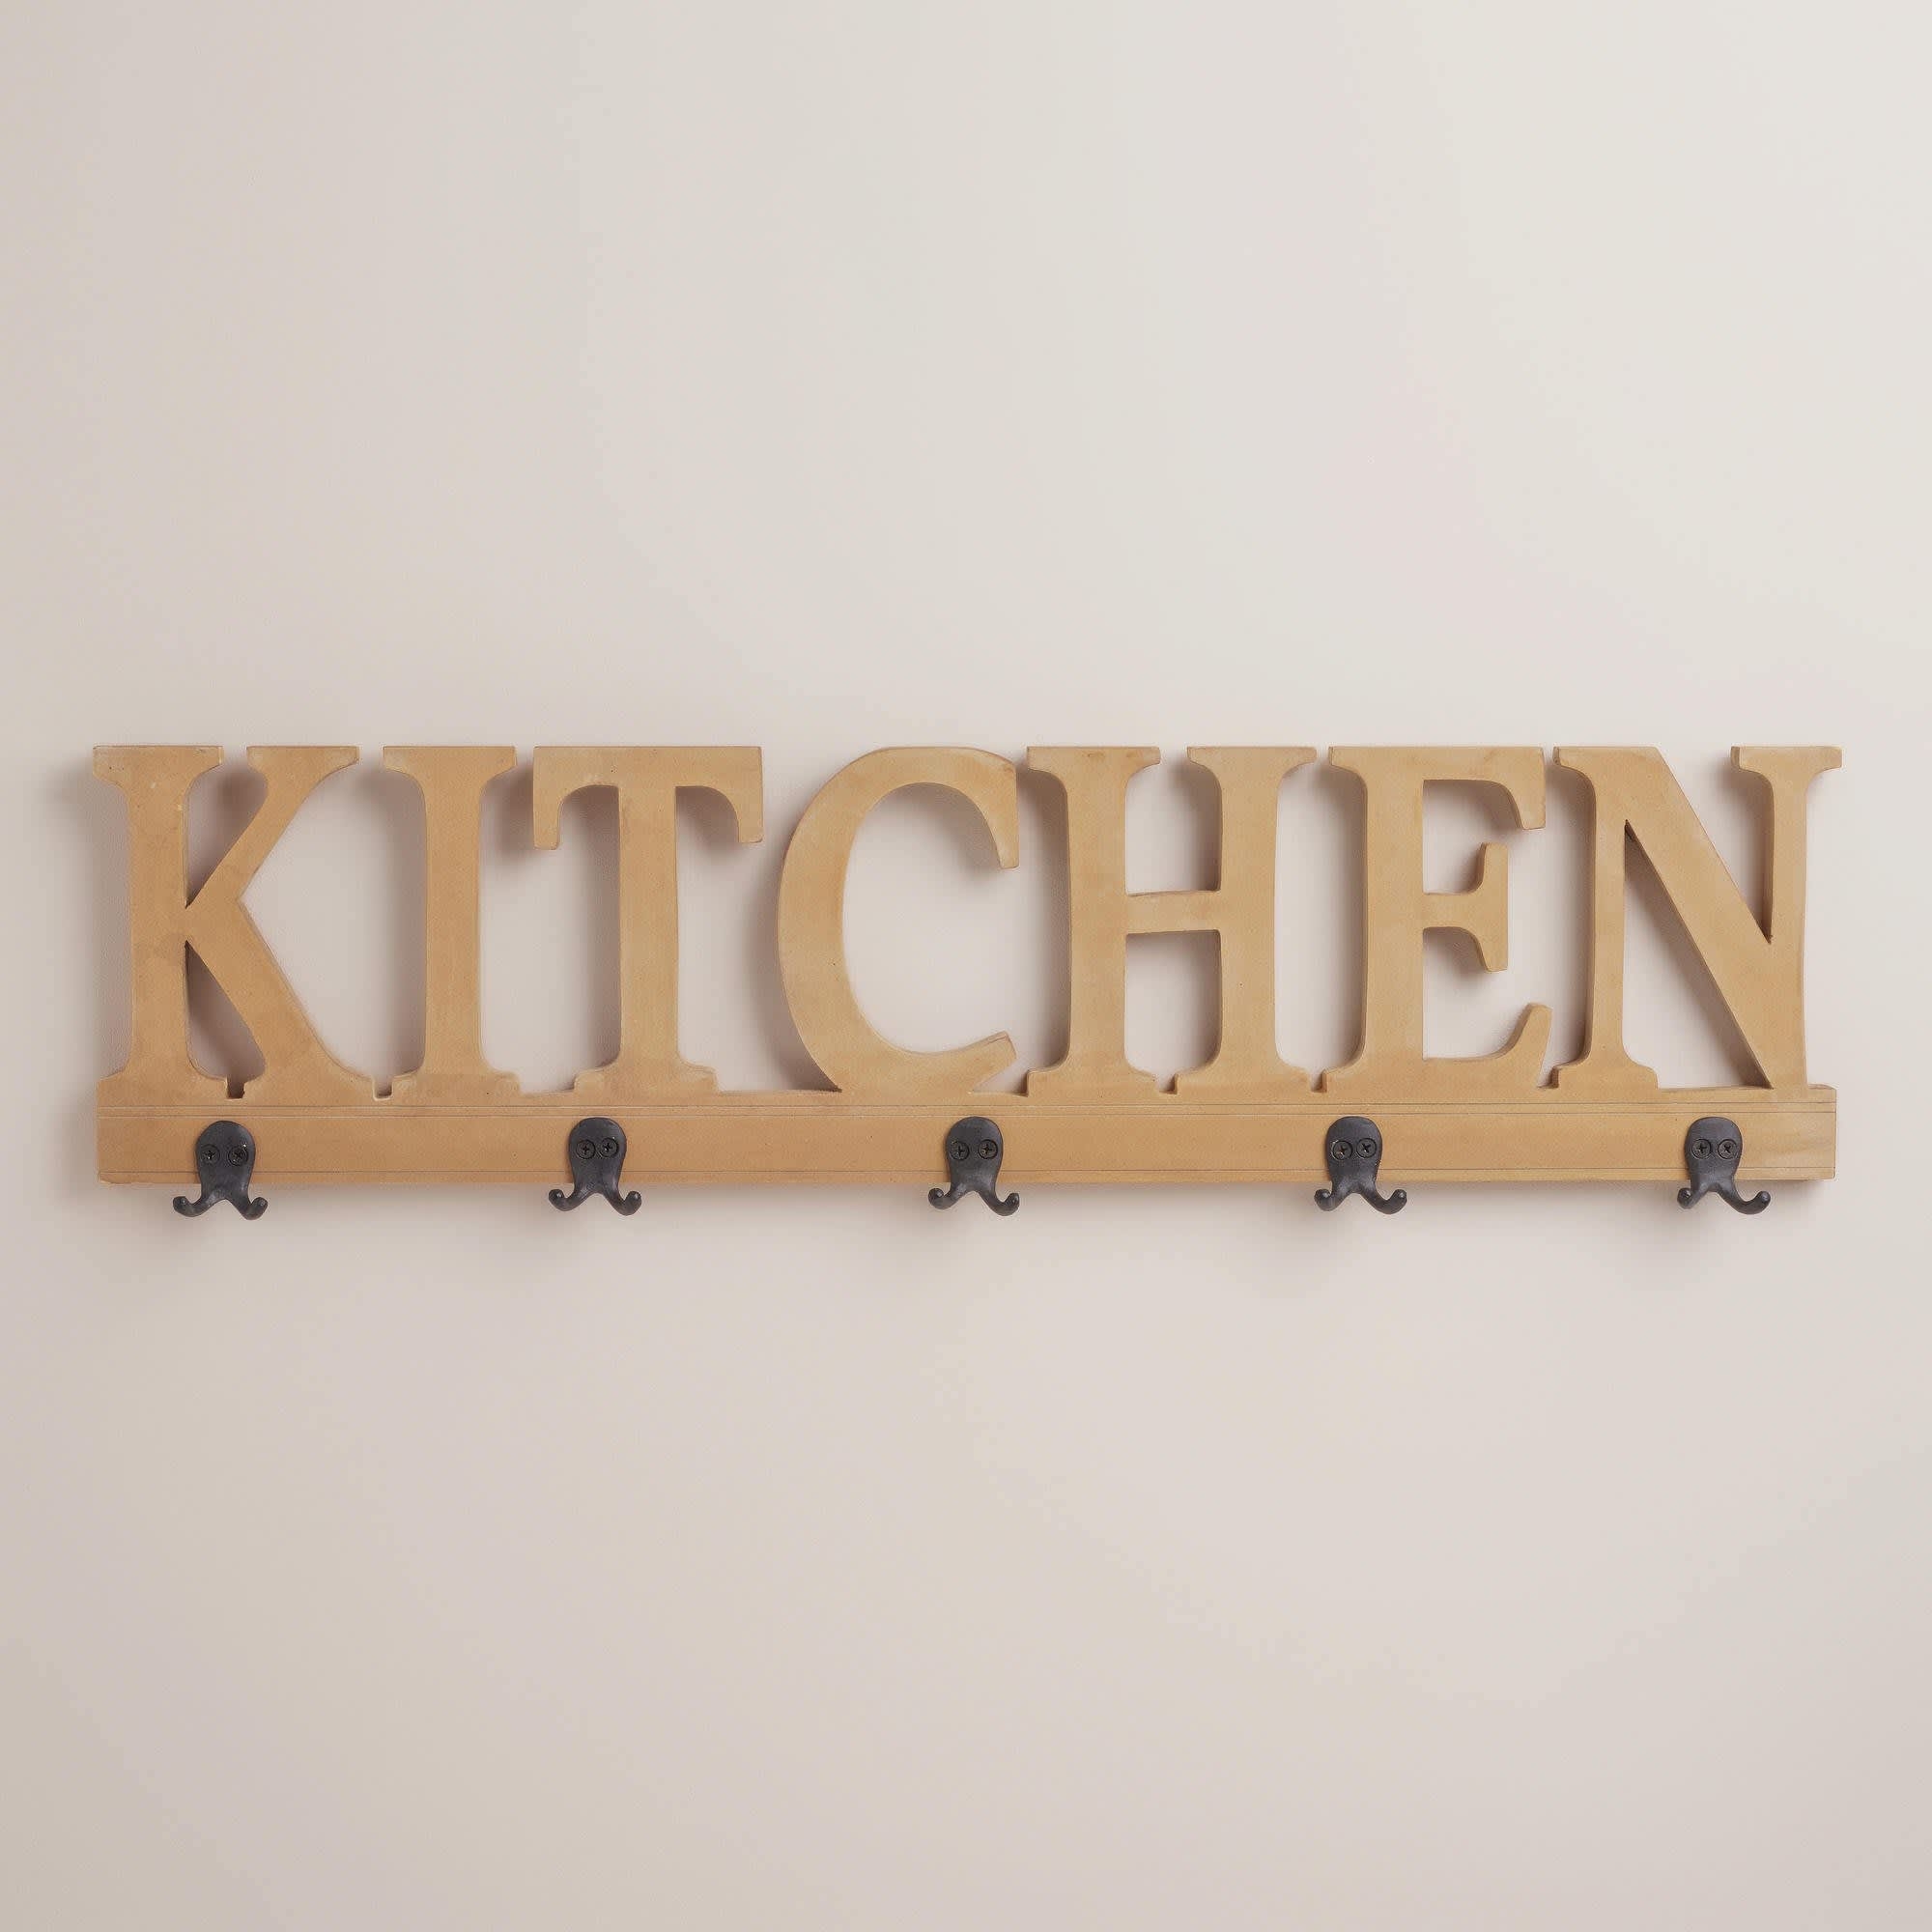 Large 5 Double Hook "Kitchen" Wall Rack Hanging Mounted Decor Utensils Spoons Towels Hooks Organizer Storage Country Decoration